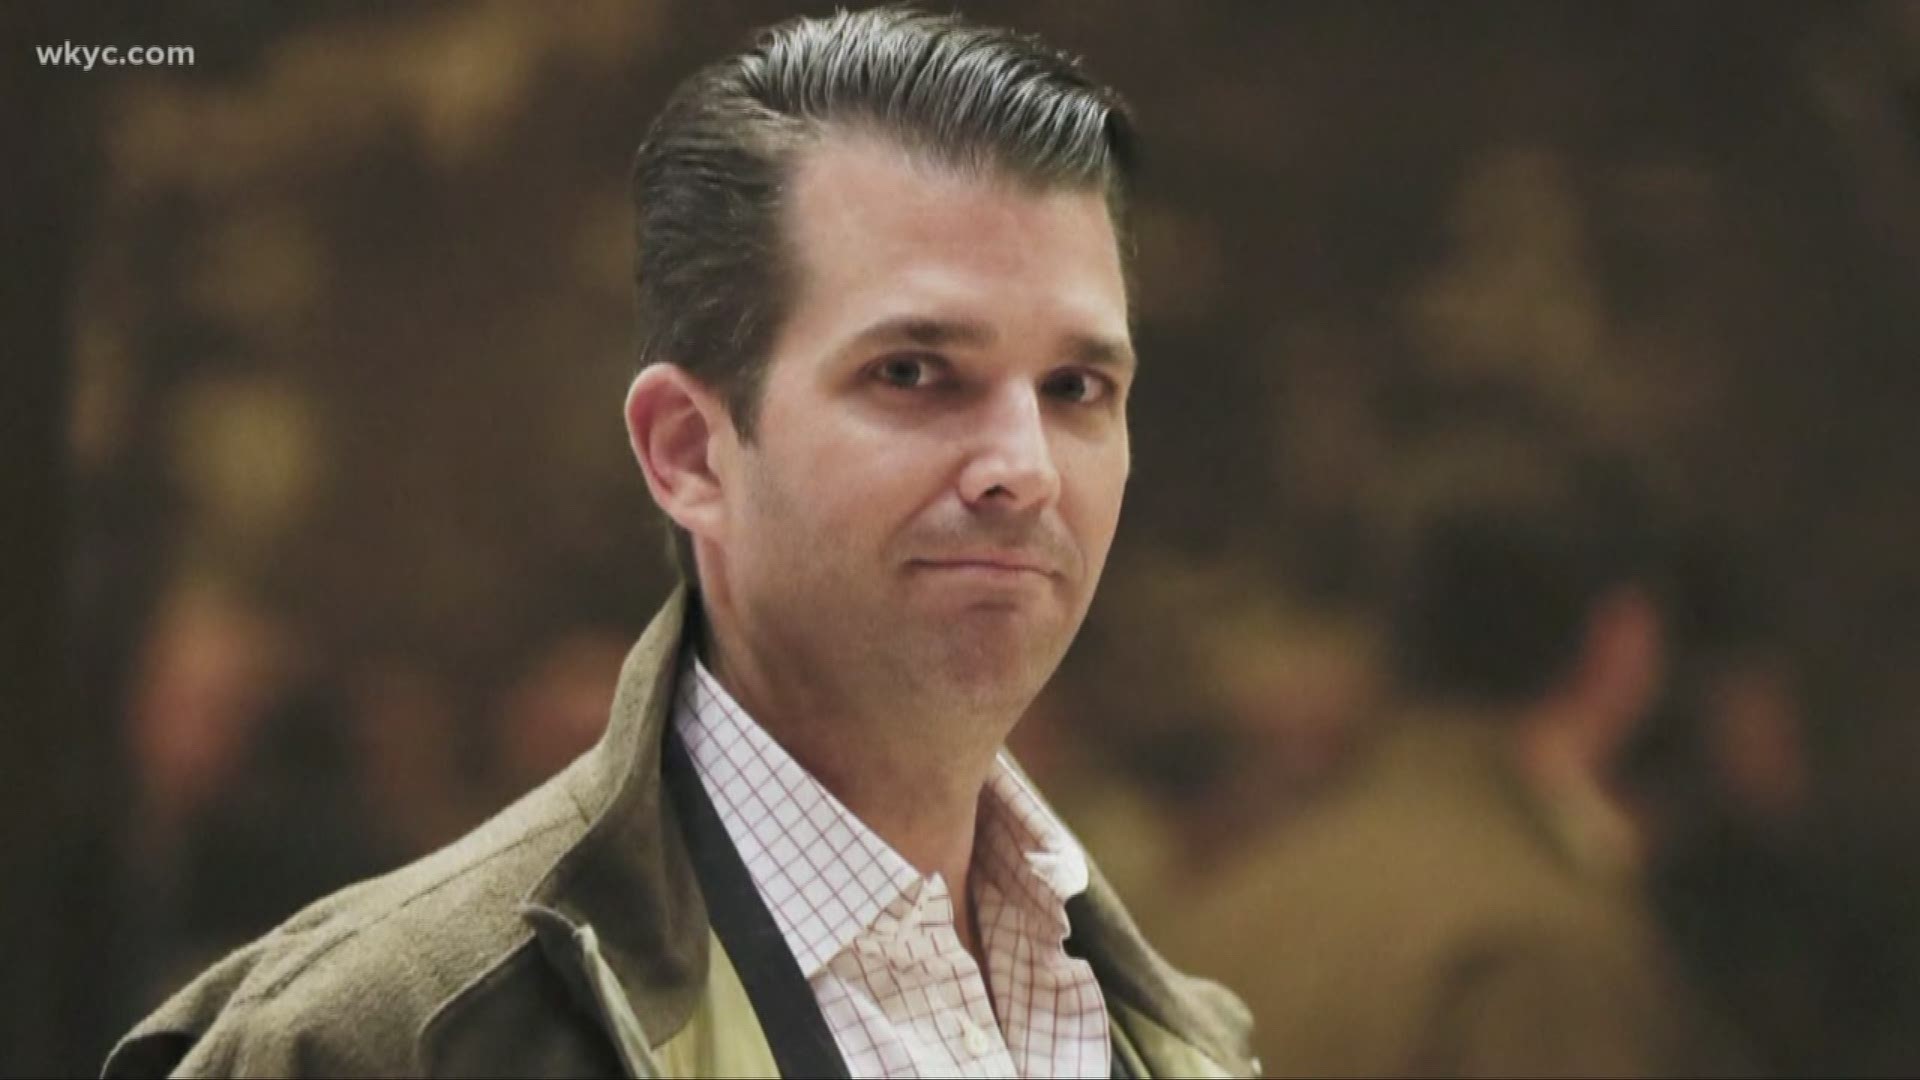 Sept. 5, 2018: Trump Jr. will host a fundraiser event for Renacci in Columbus, marking his second visit to Ohio in support of the Republican candidate. Trump Jr. and Renacci had a fundraiser in Cincinnati in June.